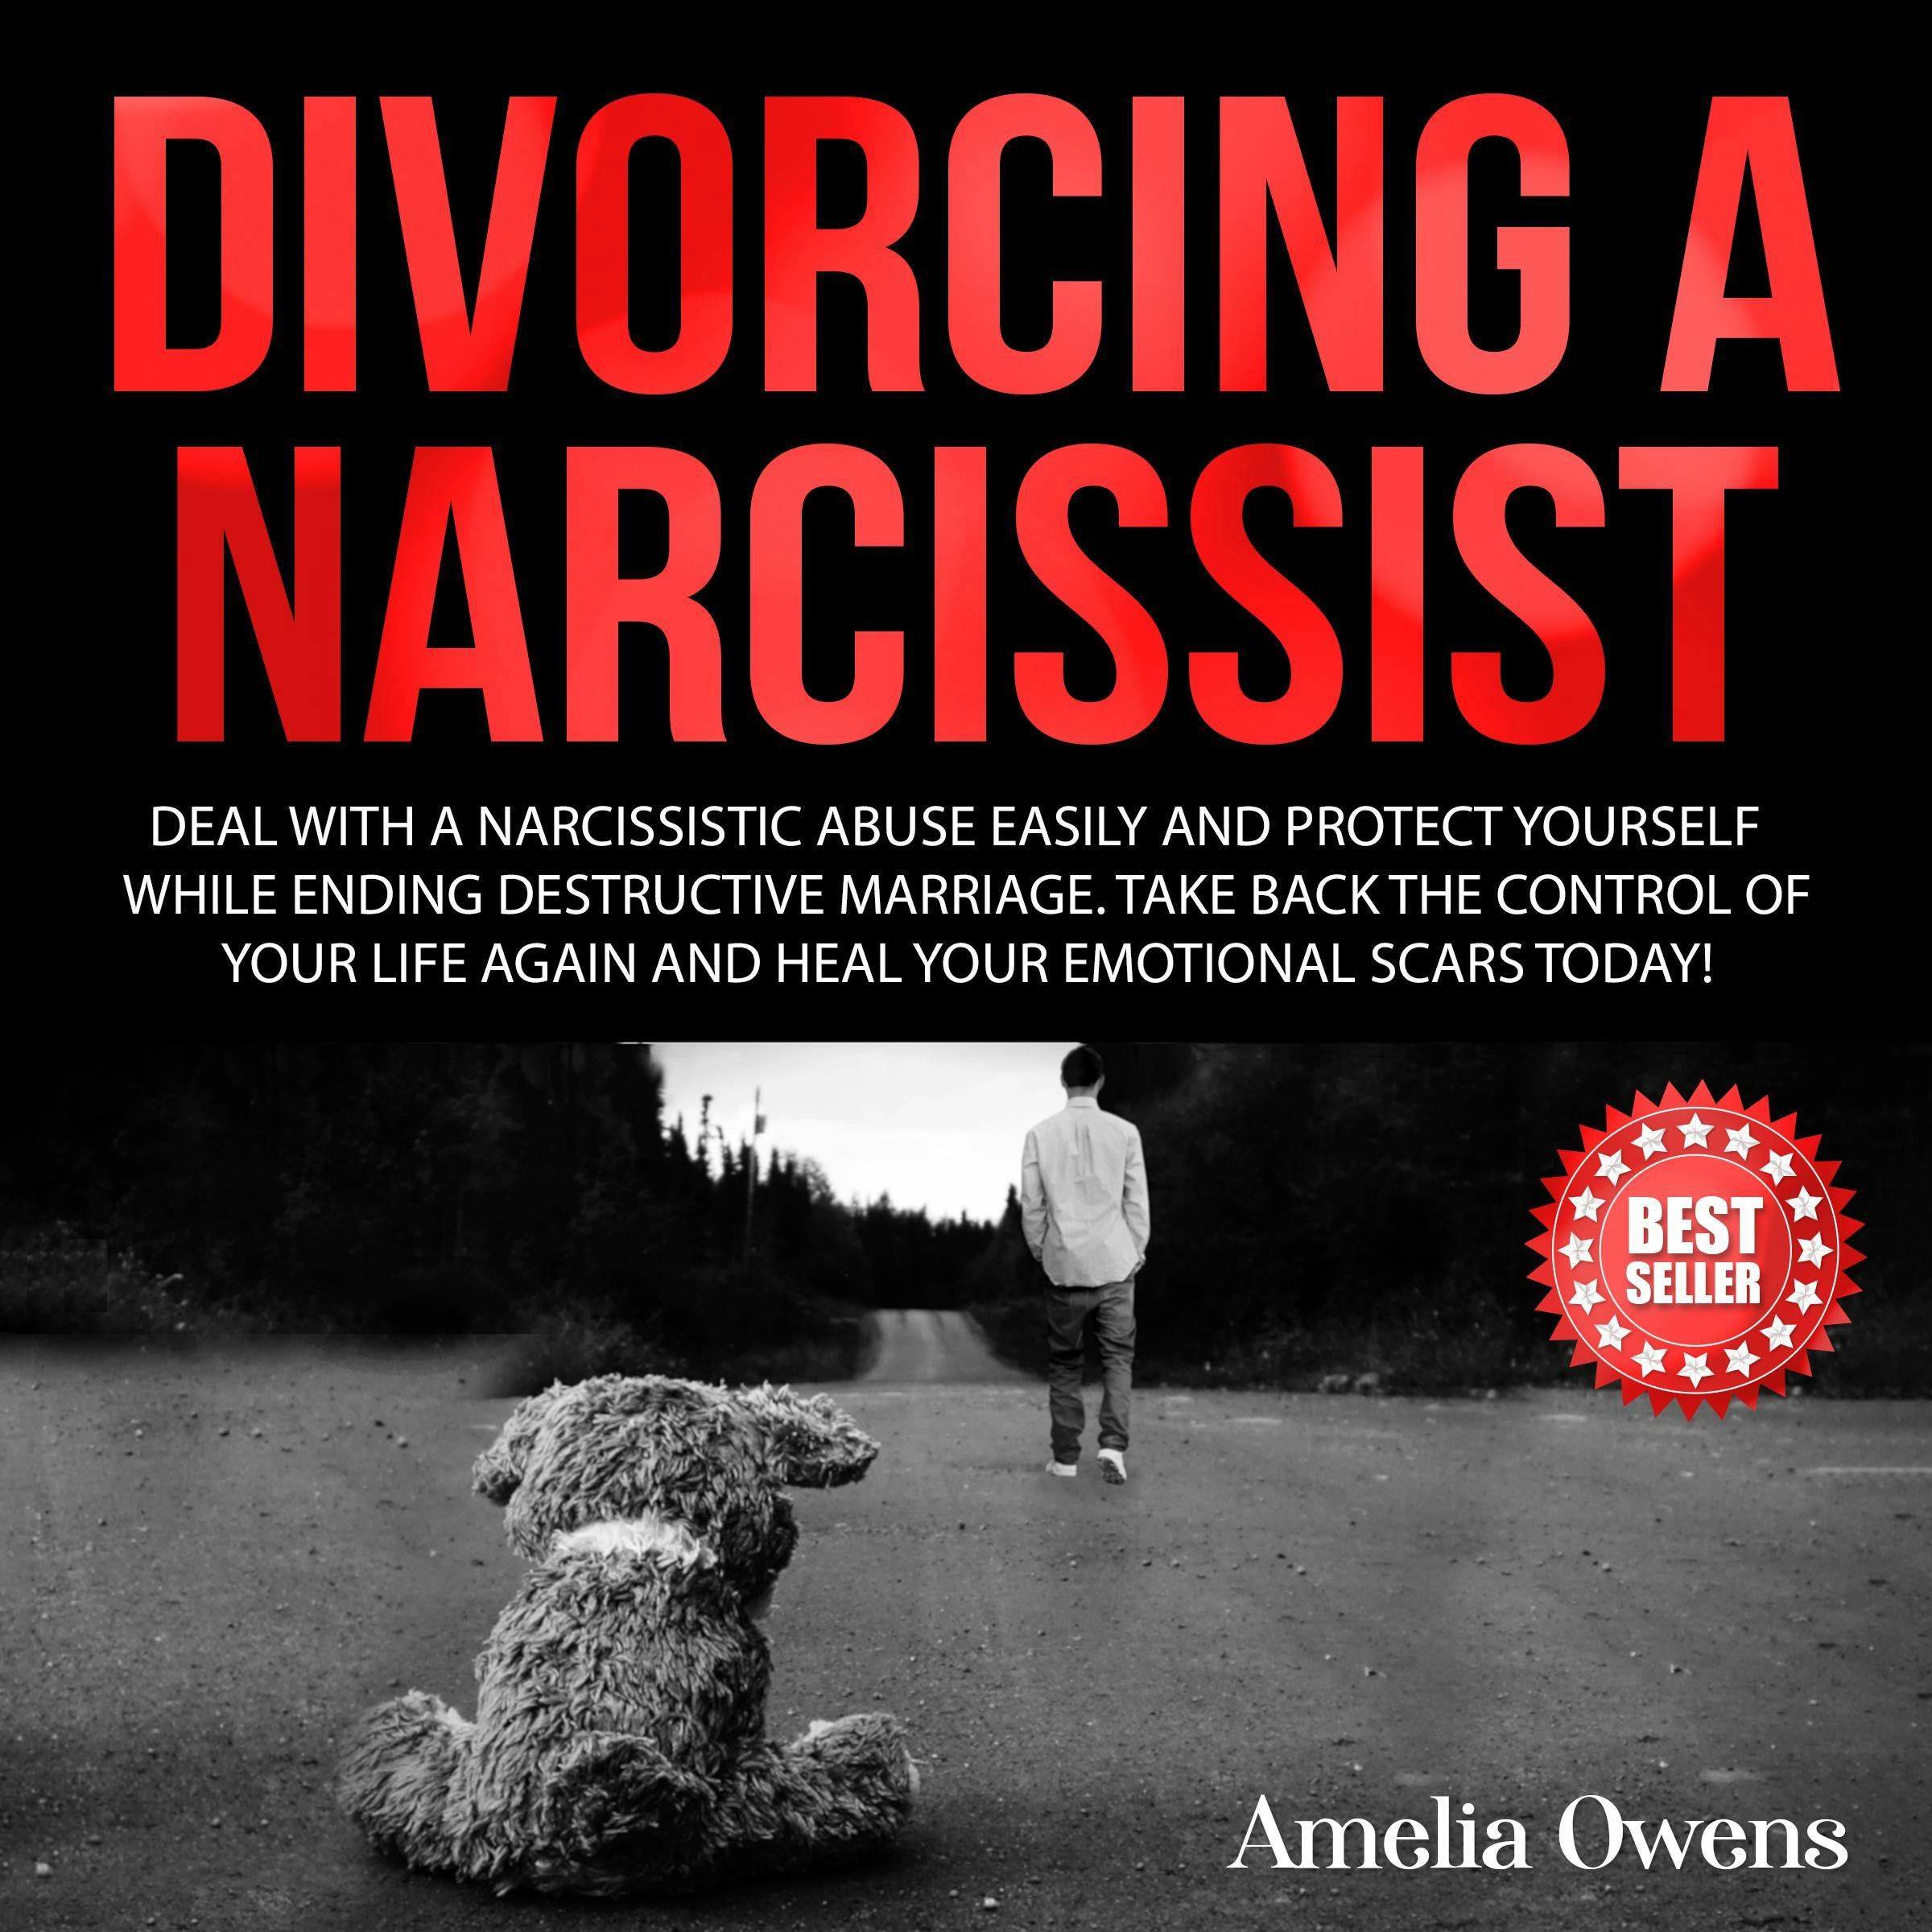 DIVORCING A NARCISSIST: Deal With a Narcissistic Abuse Easily and Protect Yourself While Ending Destructive Marriage. Take Back the Control of Your Life Again and Heal Your Emotional Scars Today! - Amelia Owens